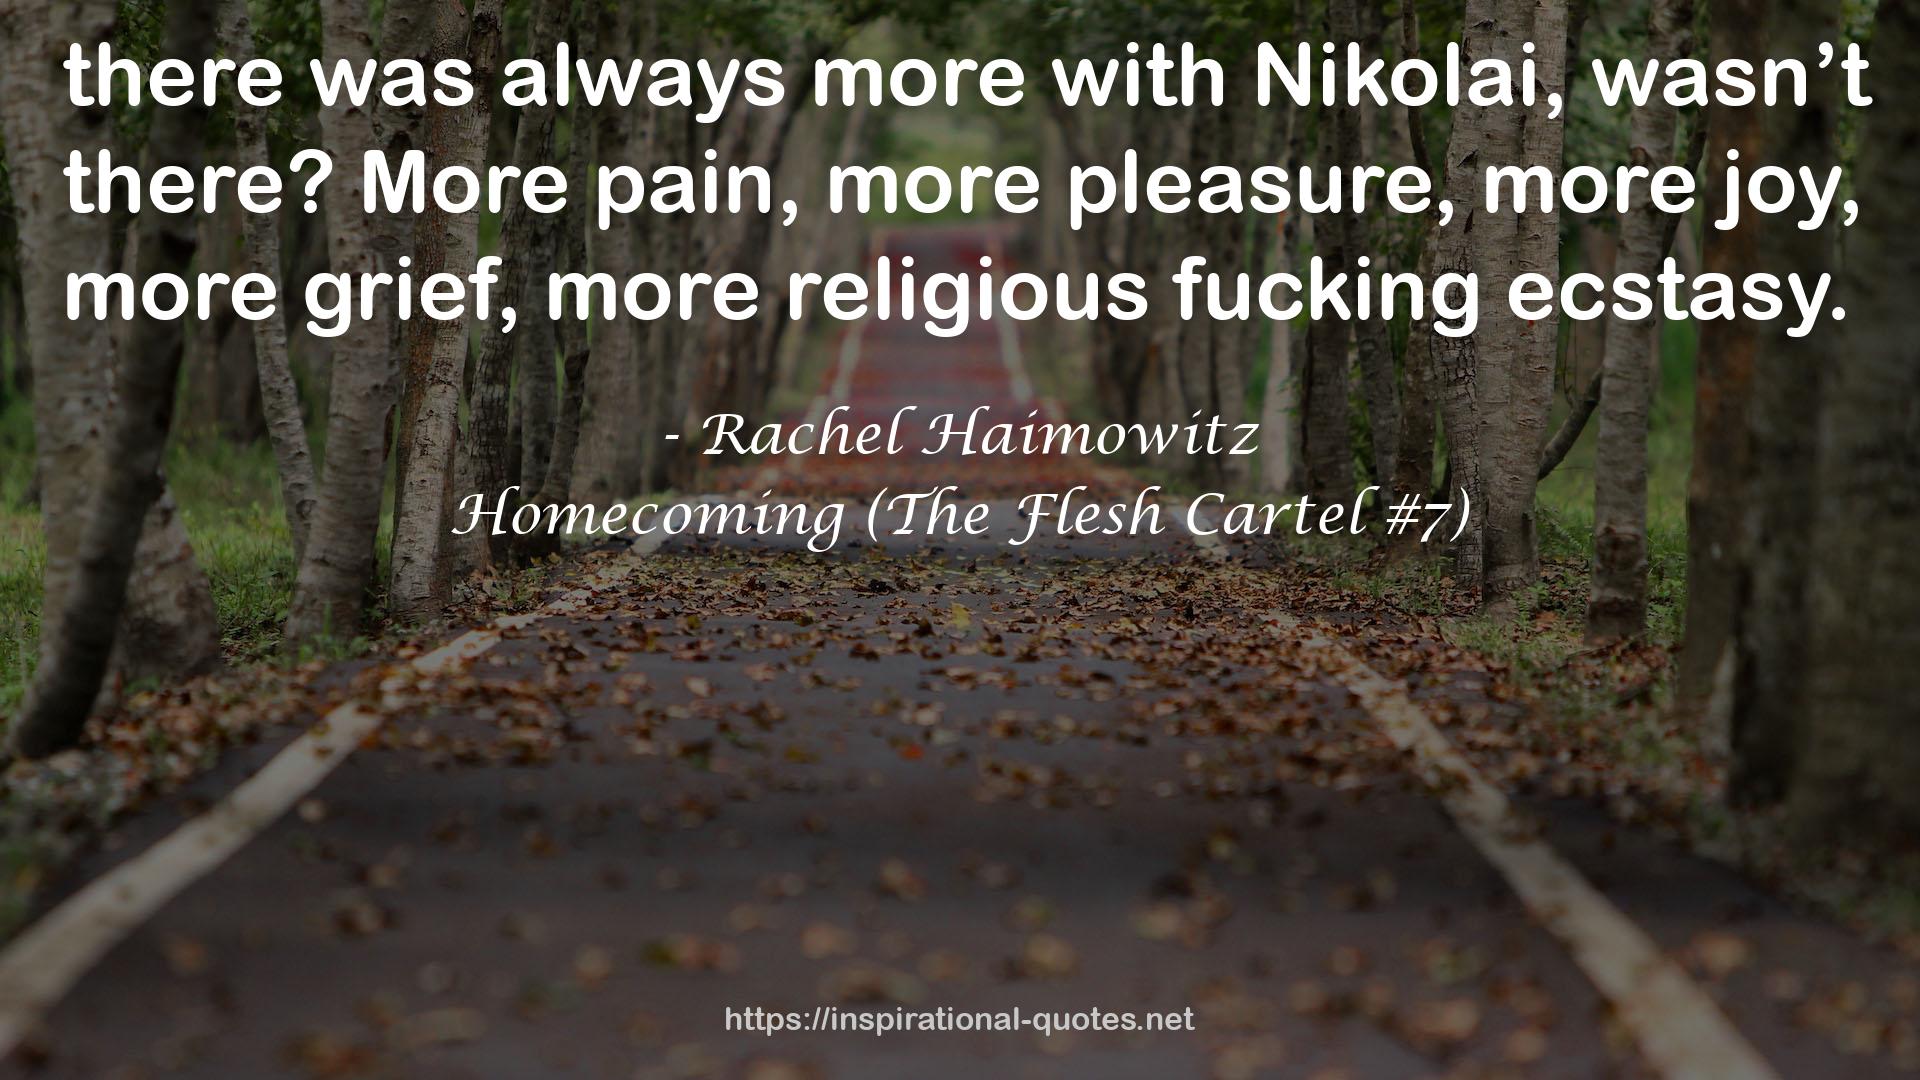 Homecoming (The Flesh Cartel #7) QUOTES